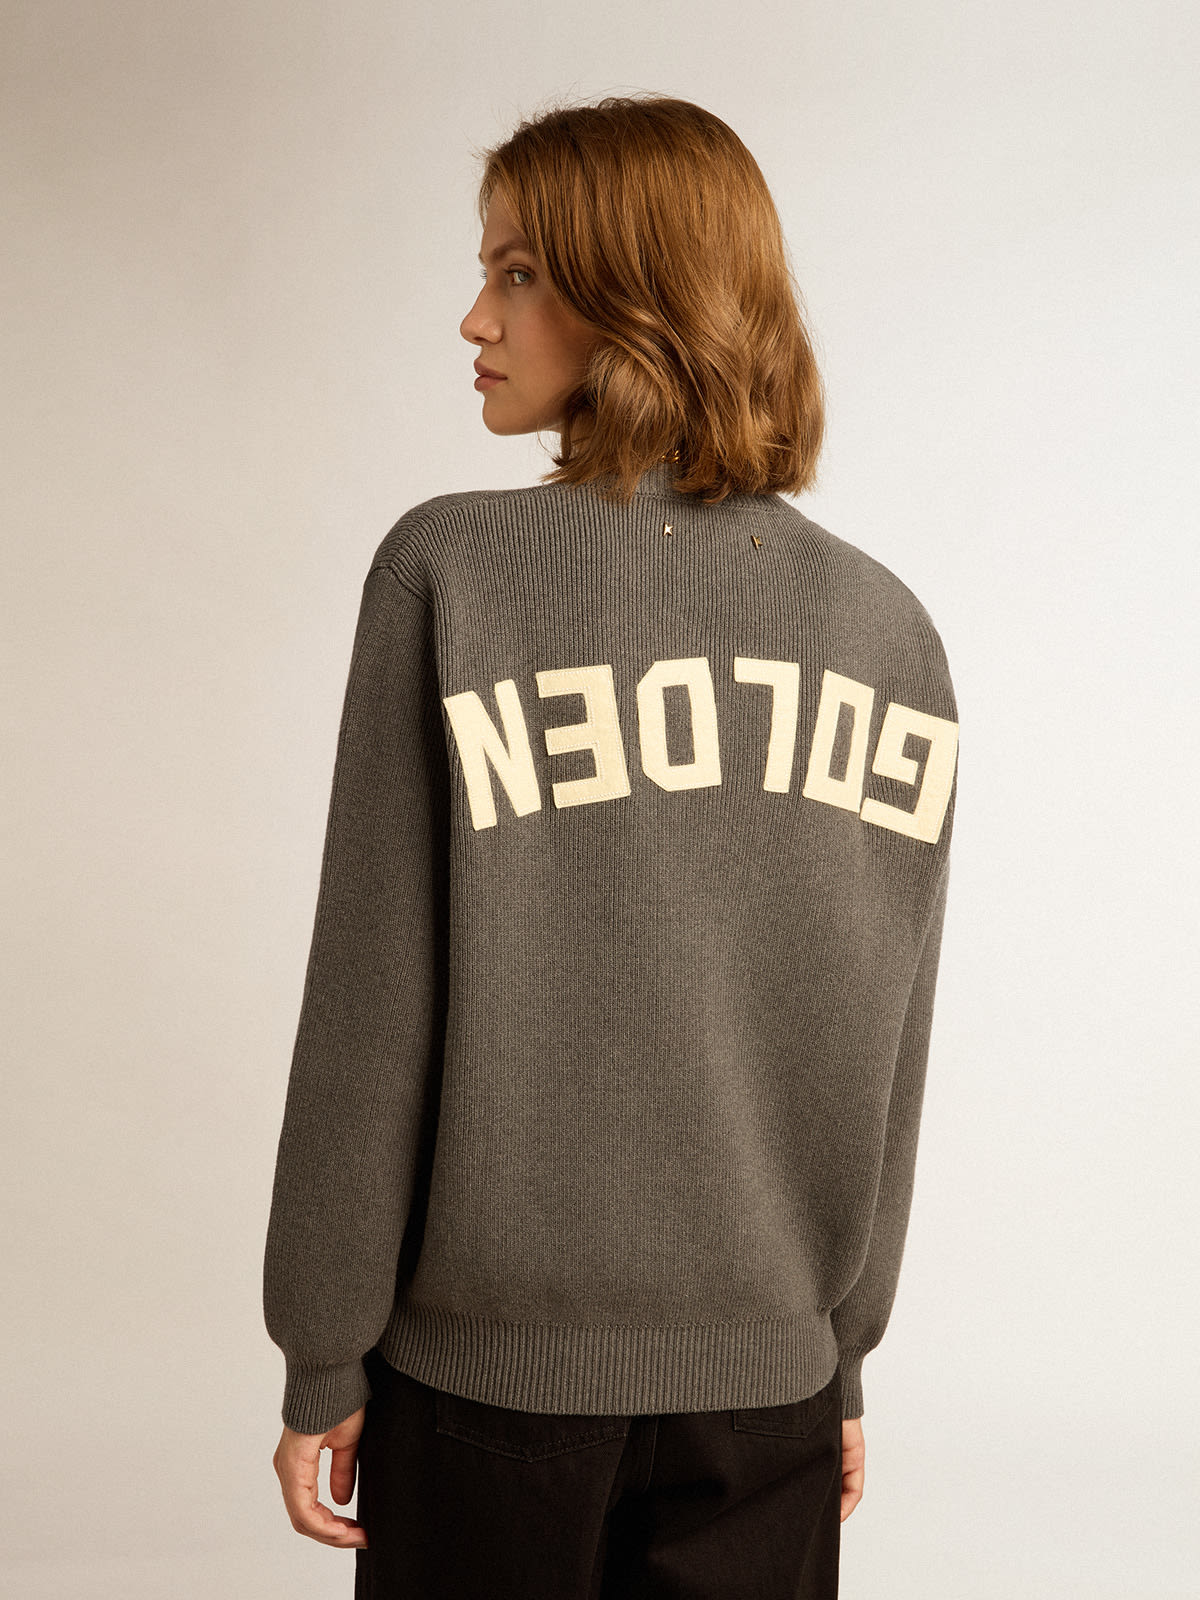 Golden Goose - Round-neck sweater in dark gray cotton with logo on the back in 